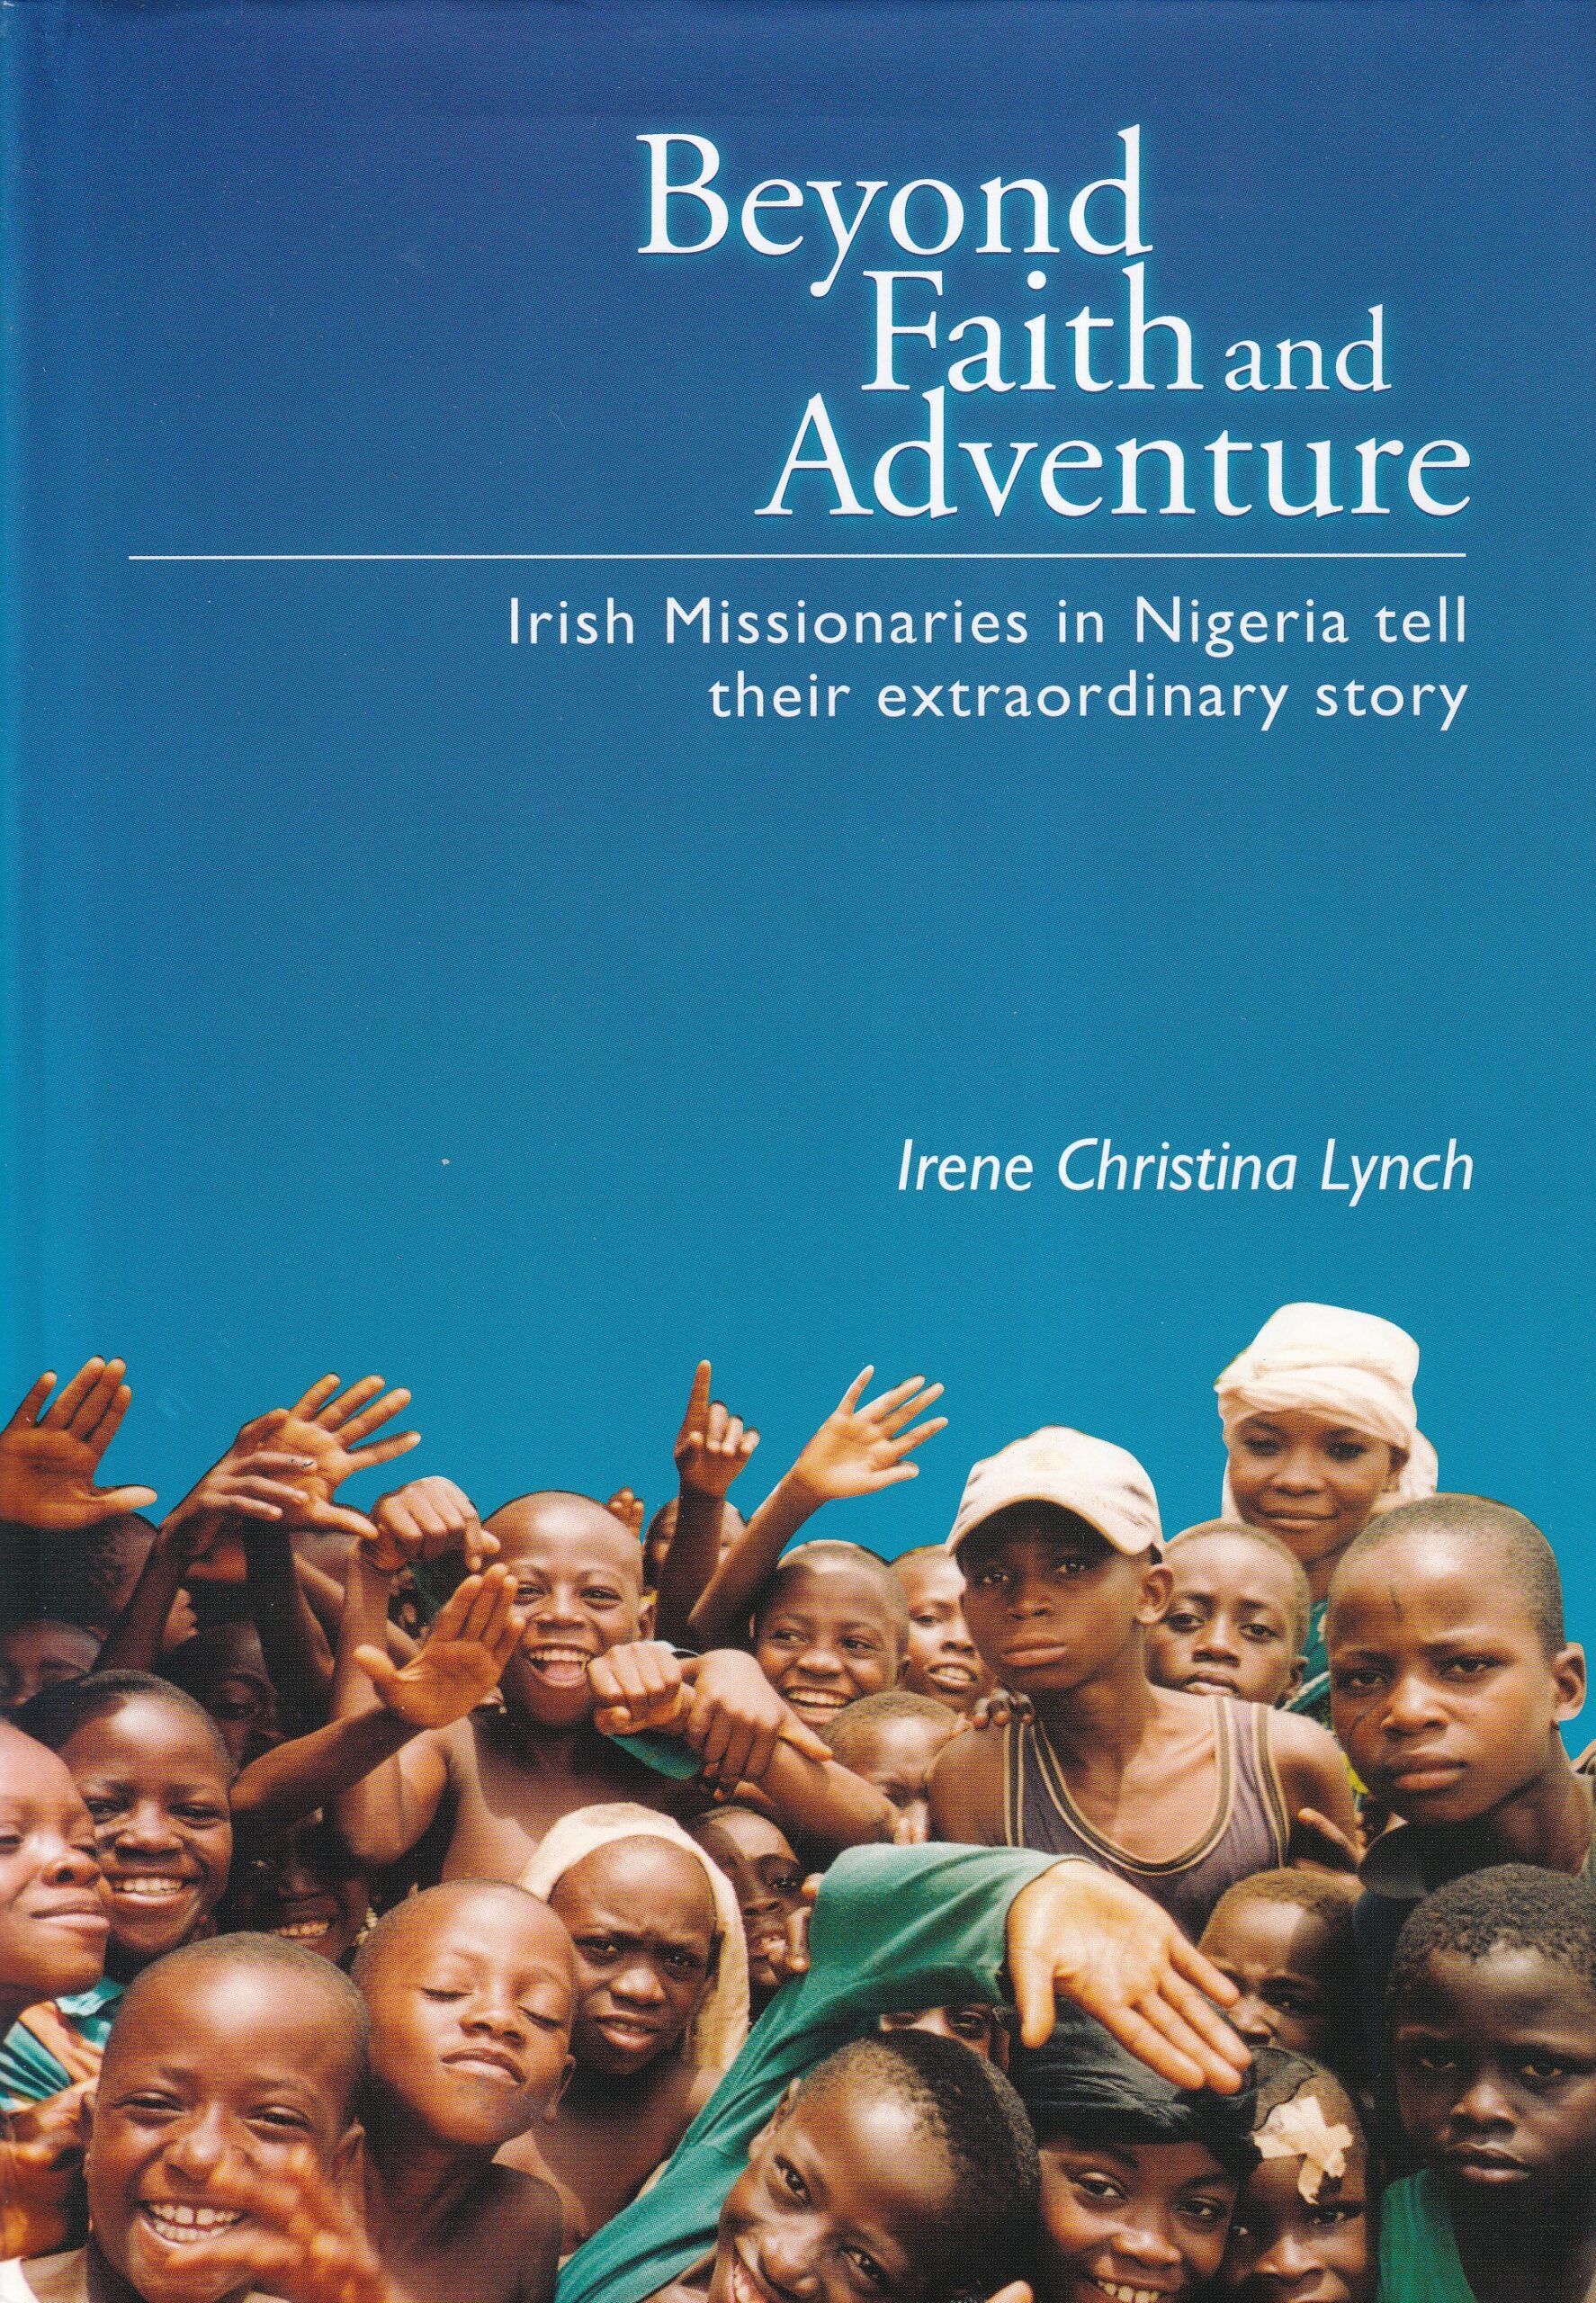 Beyond Faith and Adventure: Irish Missionaries in Nigeria Tell Their Extraordinary Story by Irene Christina Lynch